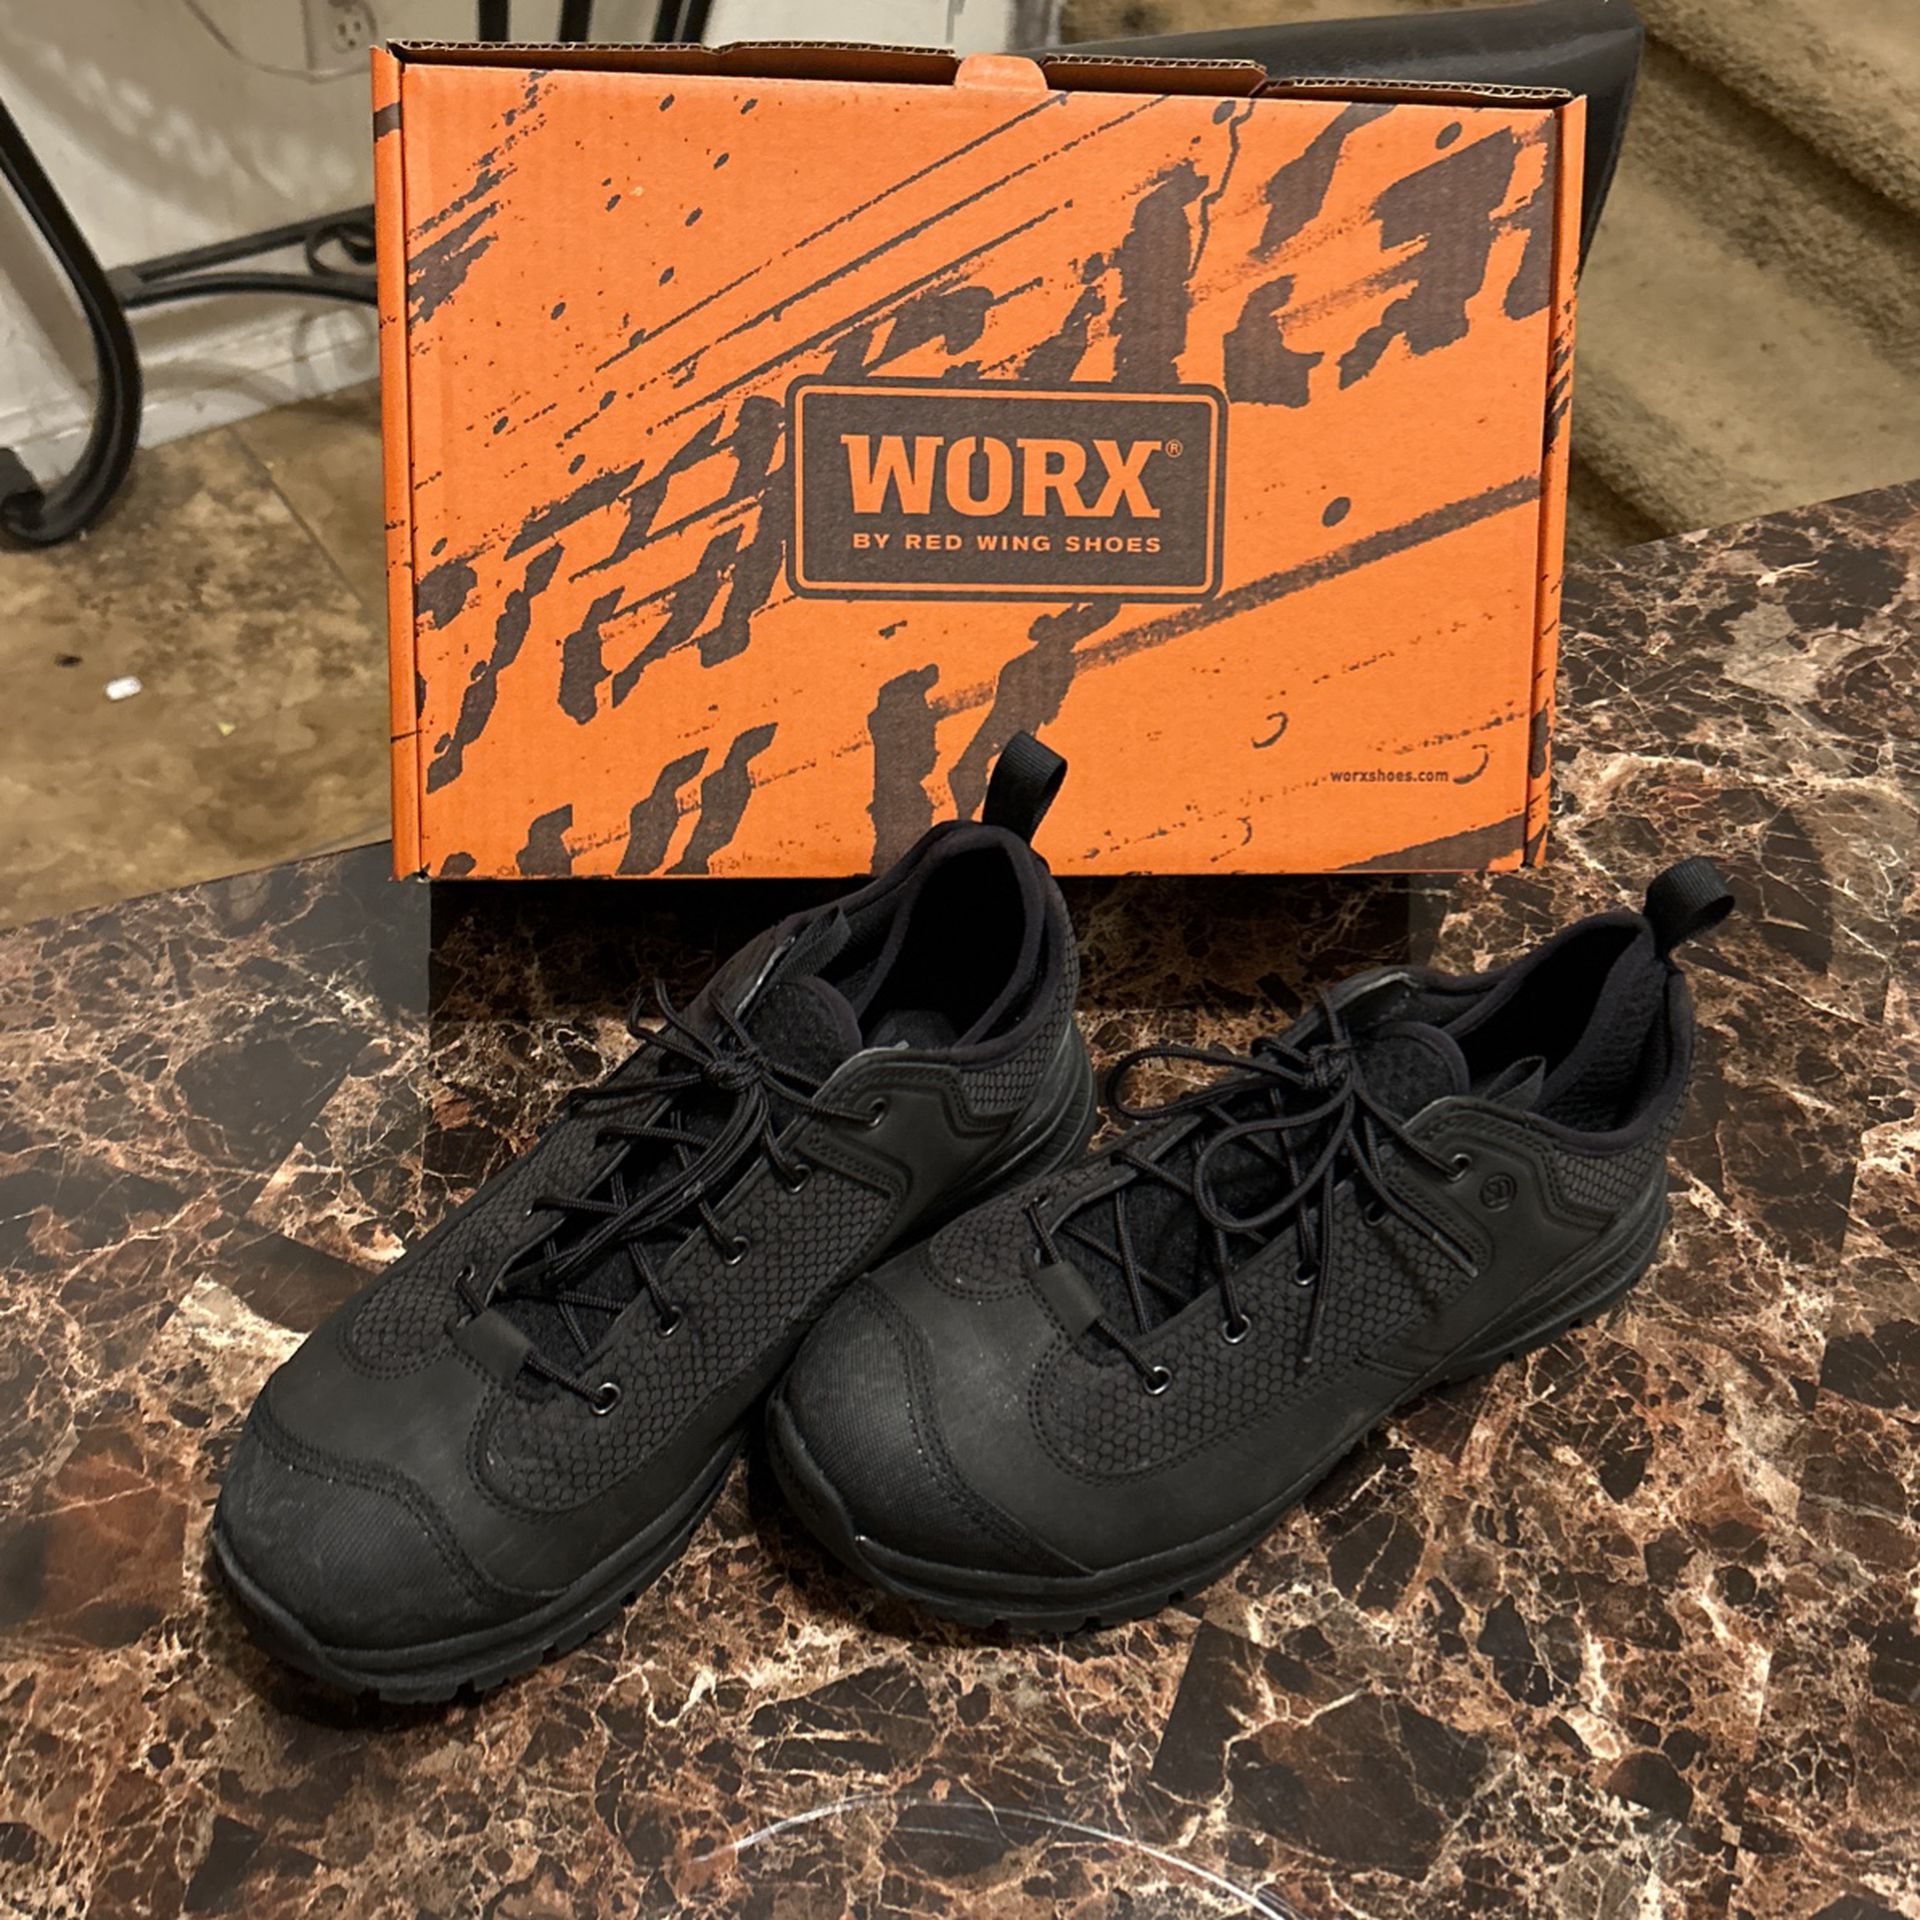 Work Shoes By Red Wing shoes